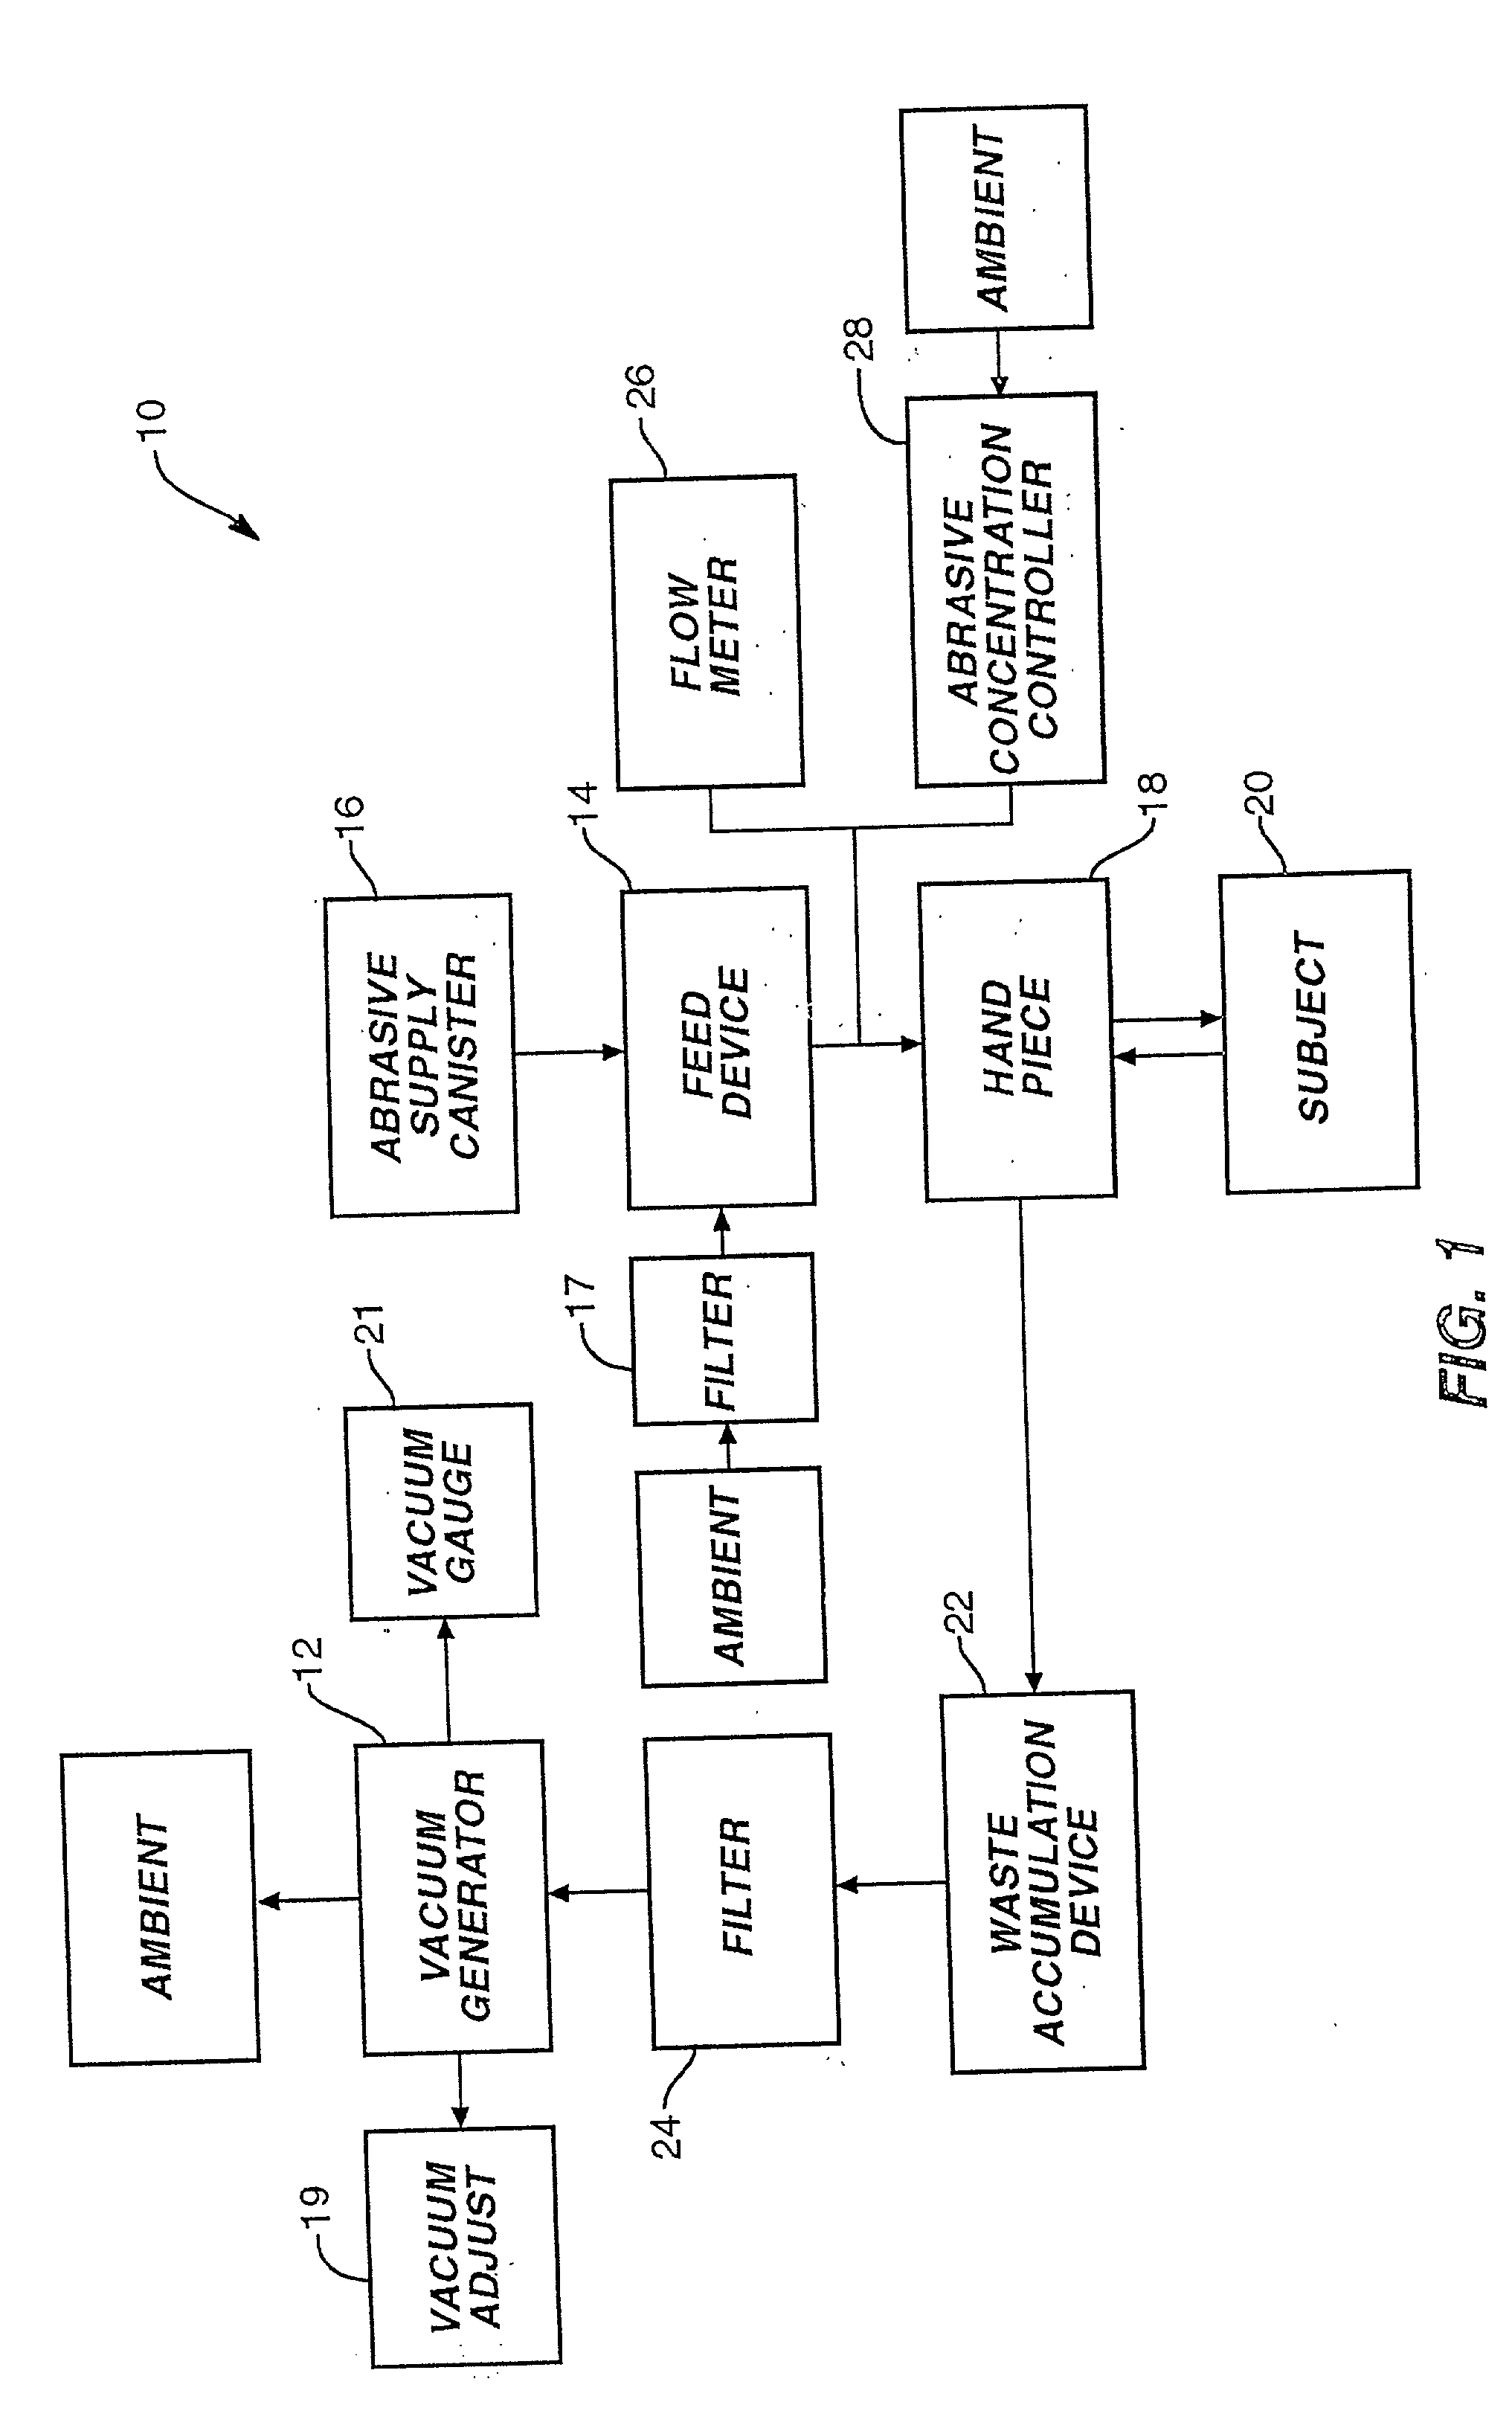 Method and system for performing microabrasion